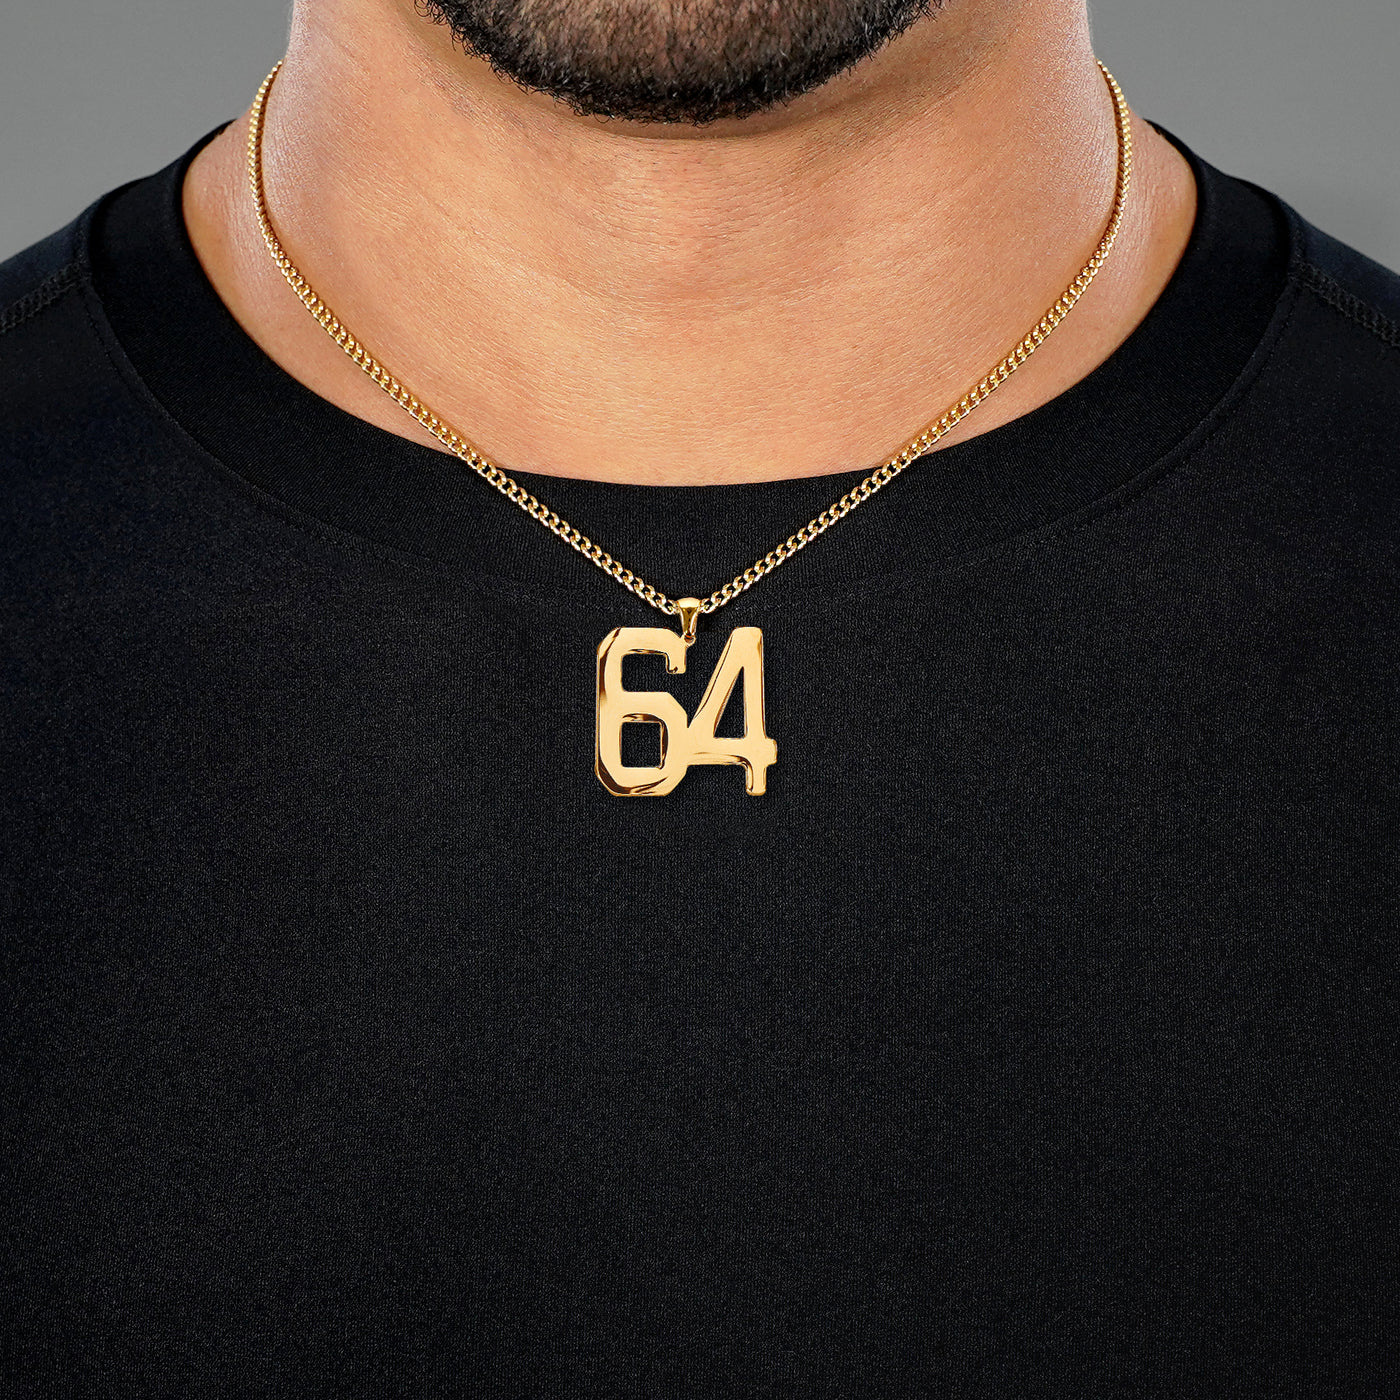 64 Number Pendant with Chain Necklace - Gold Plated Stainless Steel